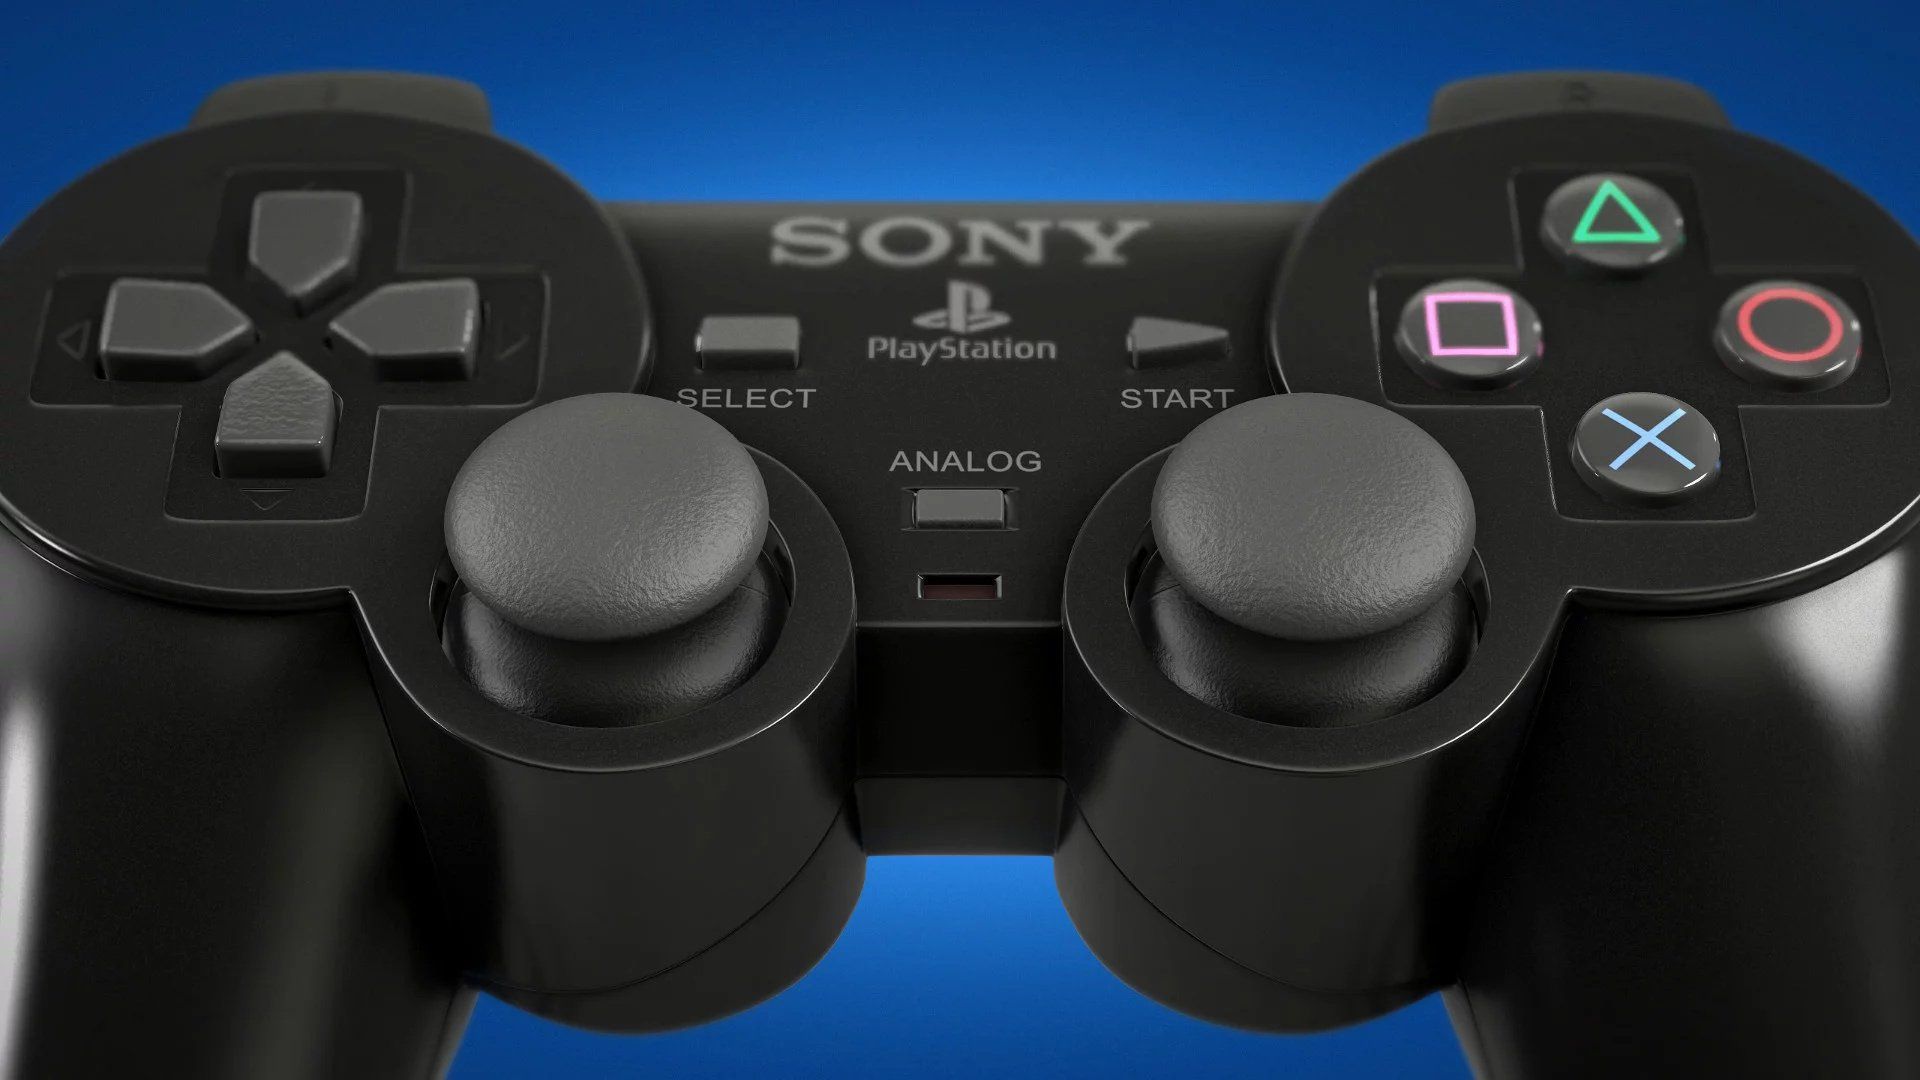 PS3 Messaging System to Be Stripped of PS PS Vita Support